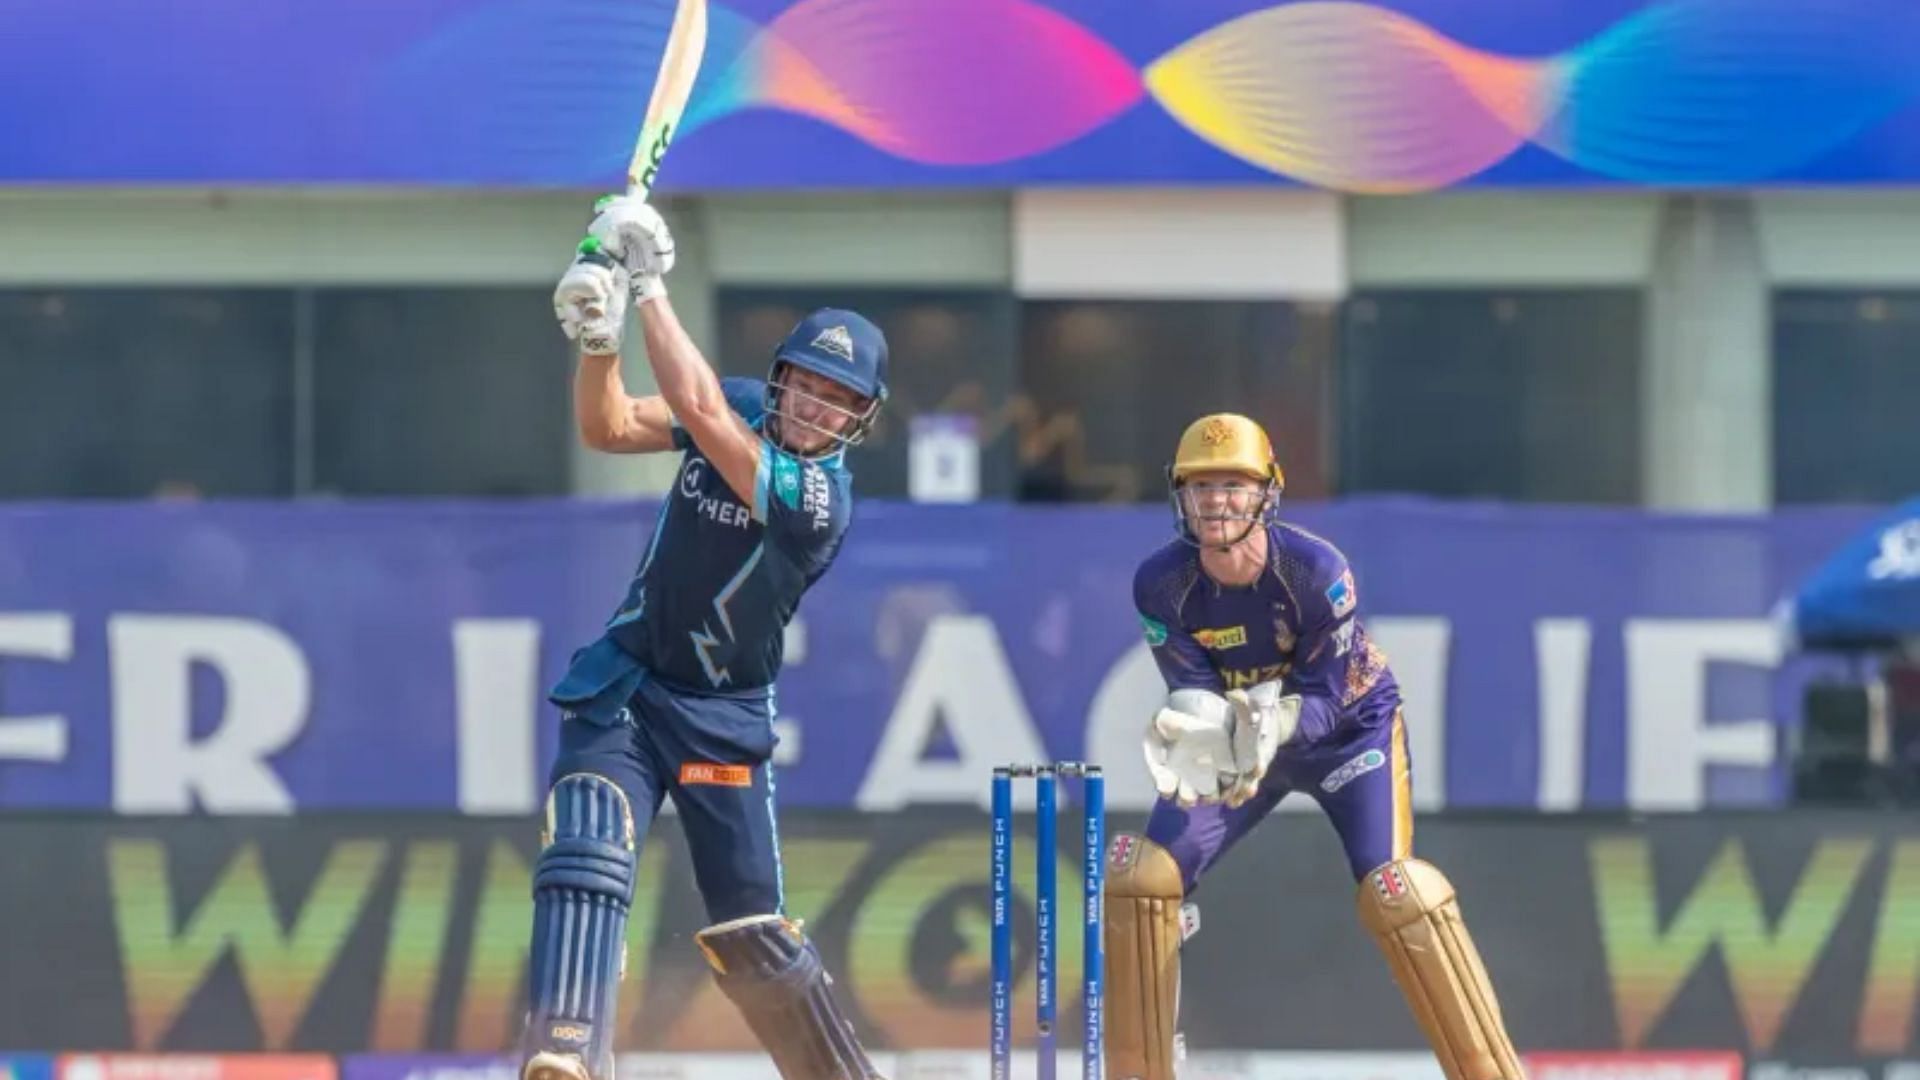 GT may need the firepower of David Miller to get the better of a resurgent KKR bowling unit. (Image Courtesy: iplt20.com)